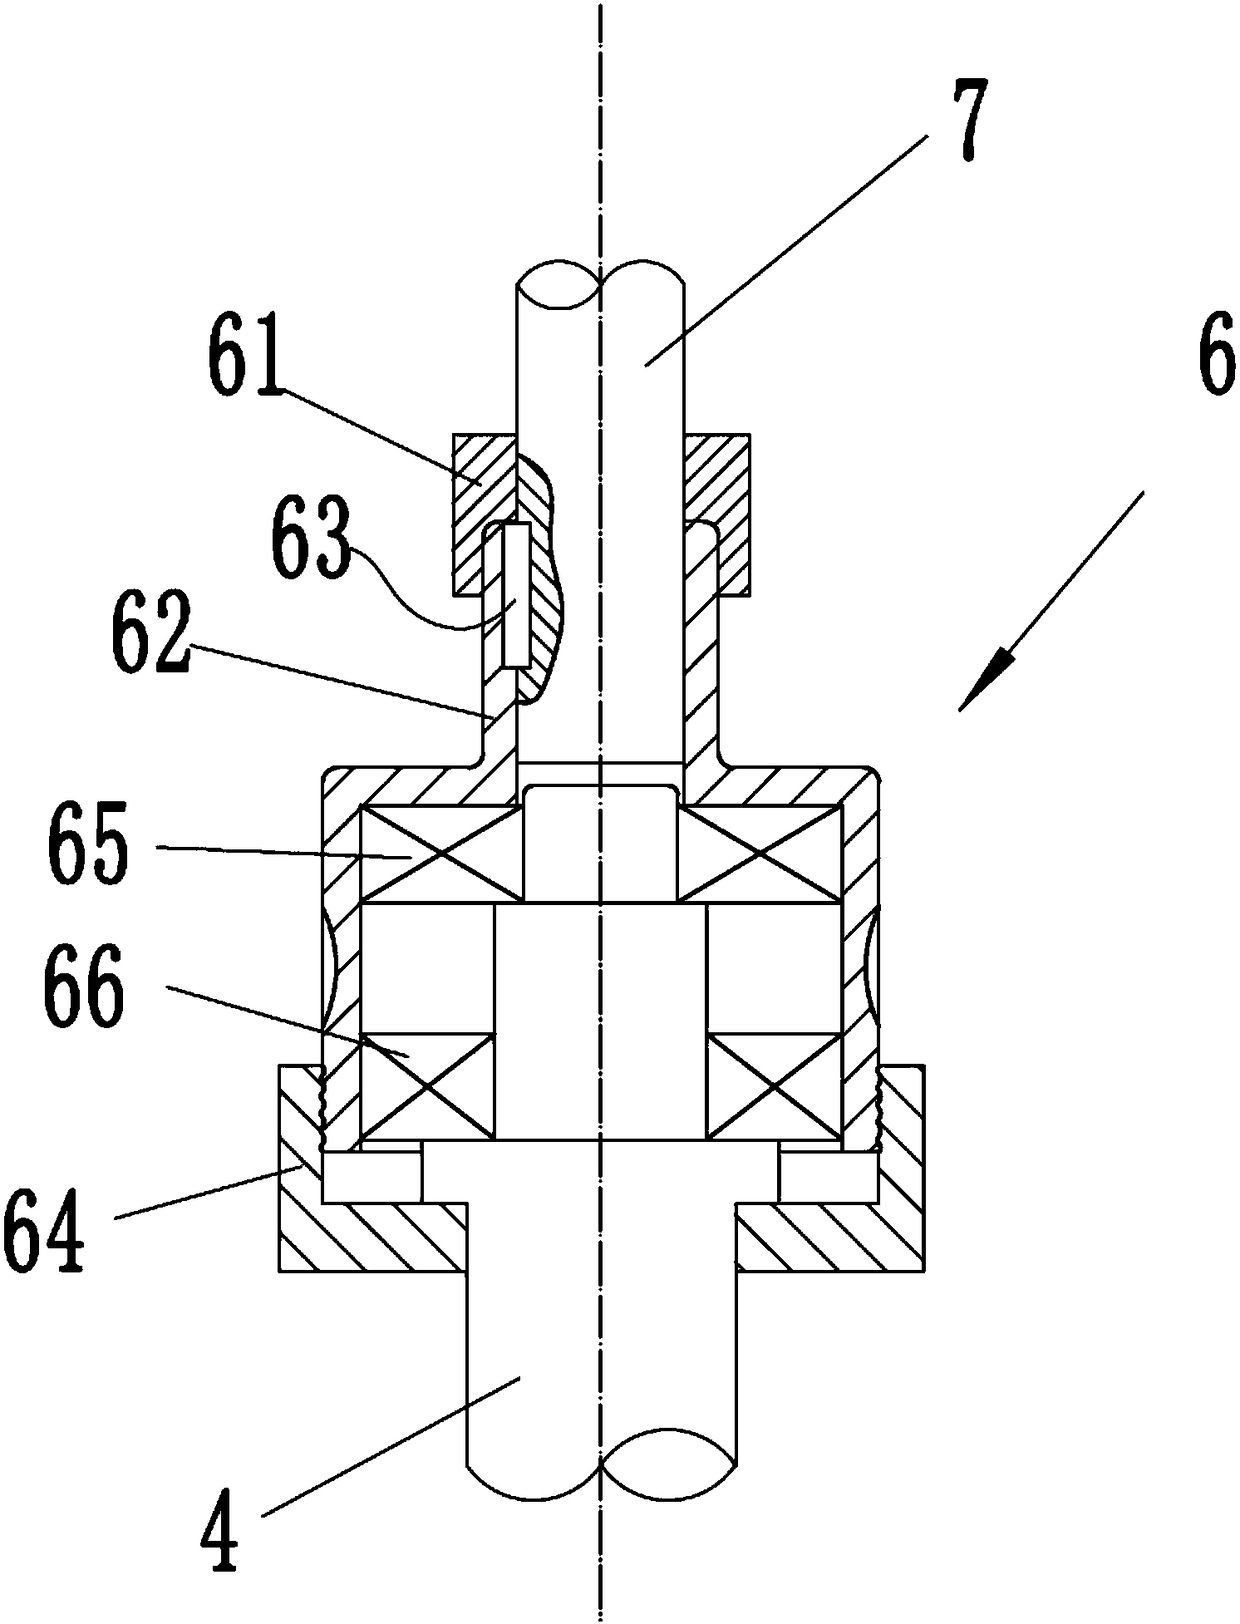 Tracking and regulating device for photovoltaic cell panel